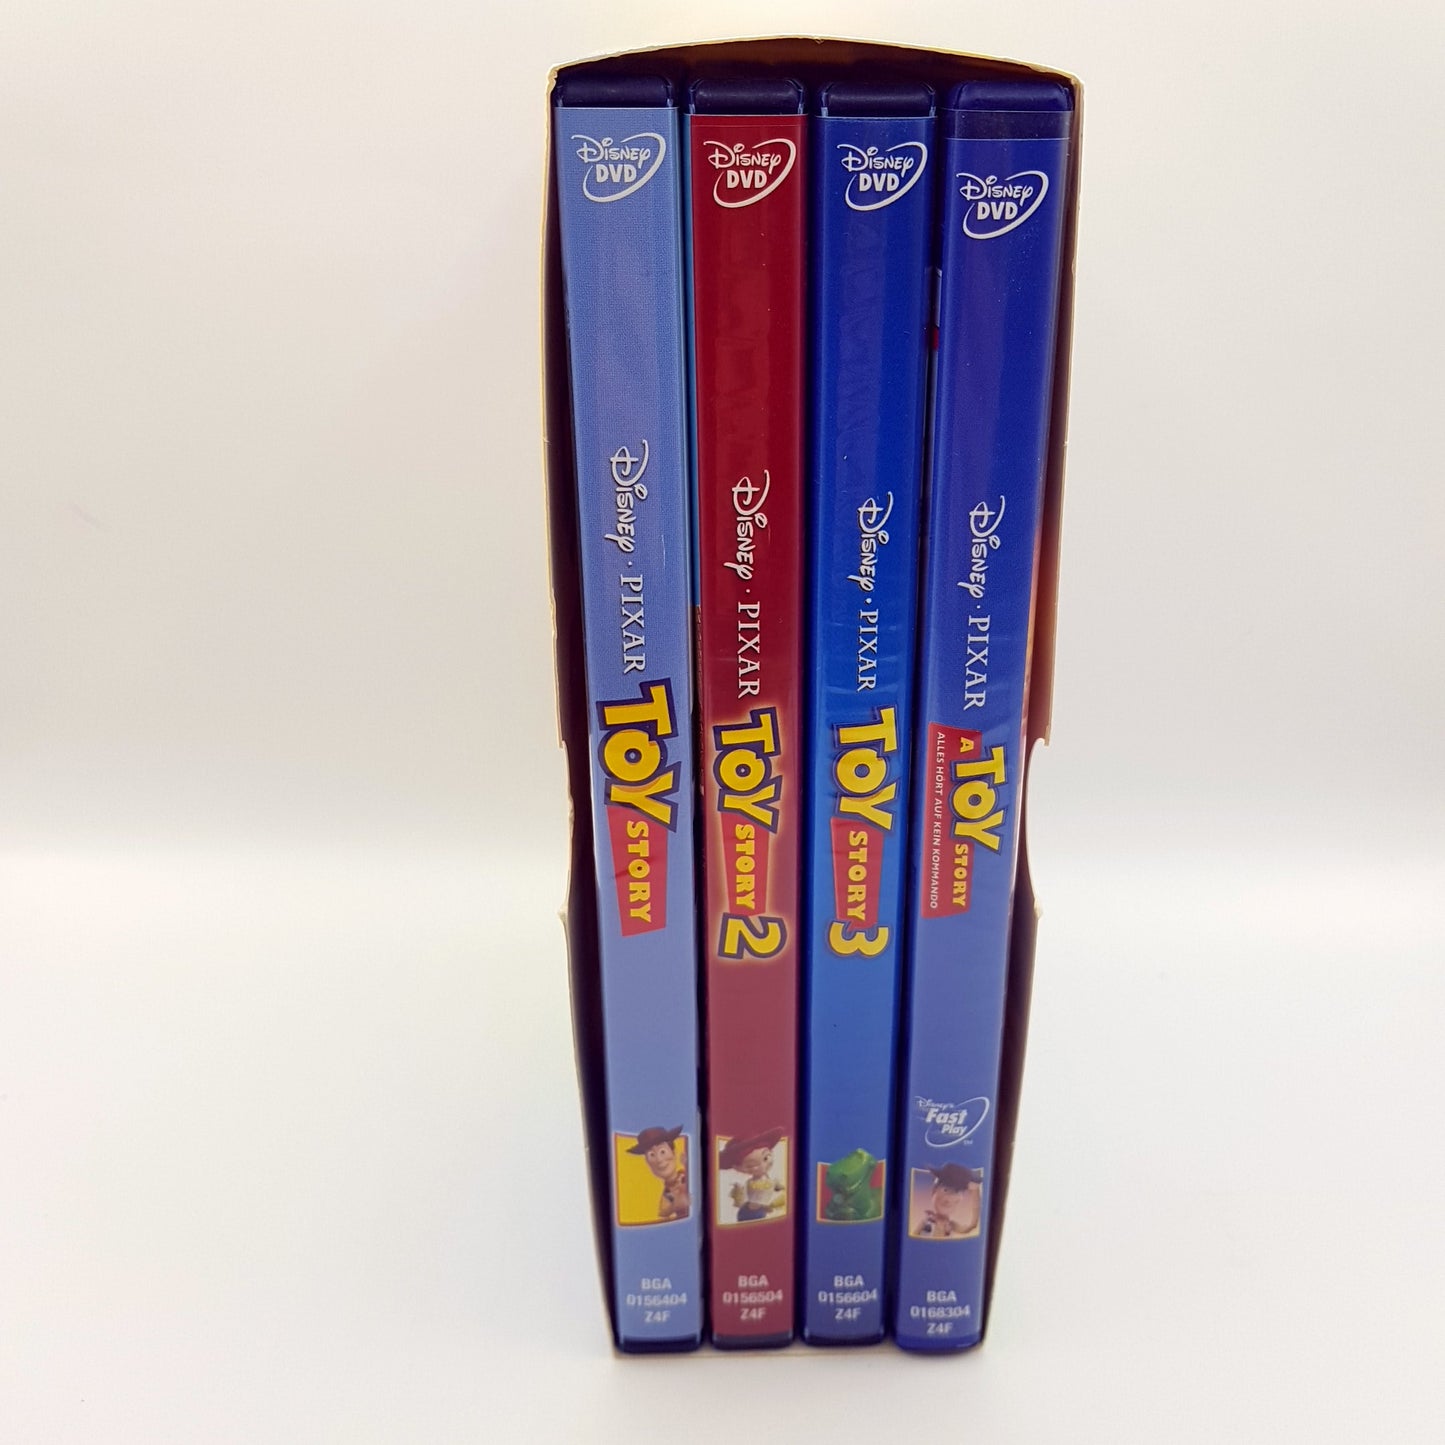 Toy Story - alle 4 Filme - Collection - gebraucht - 4 DVDs